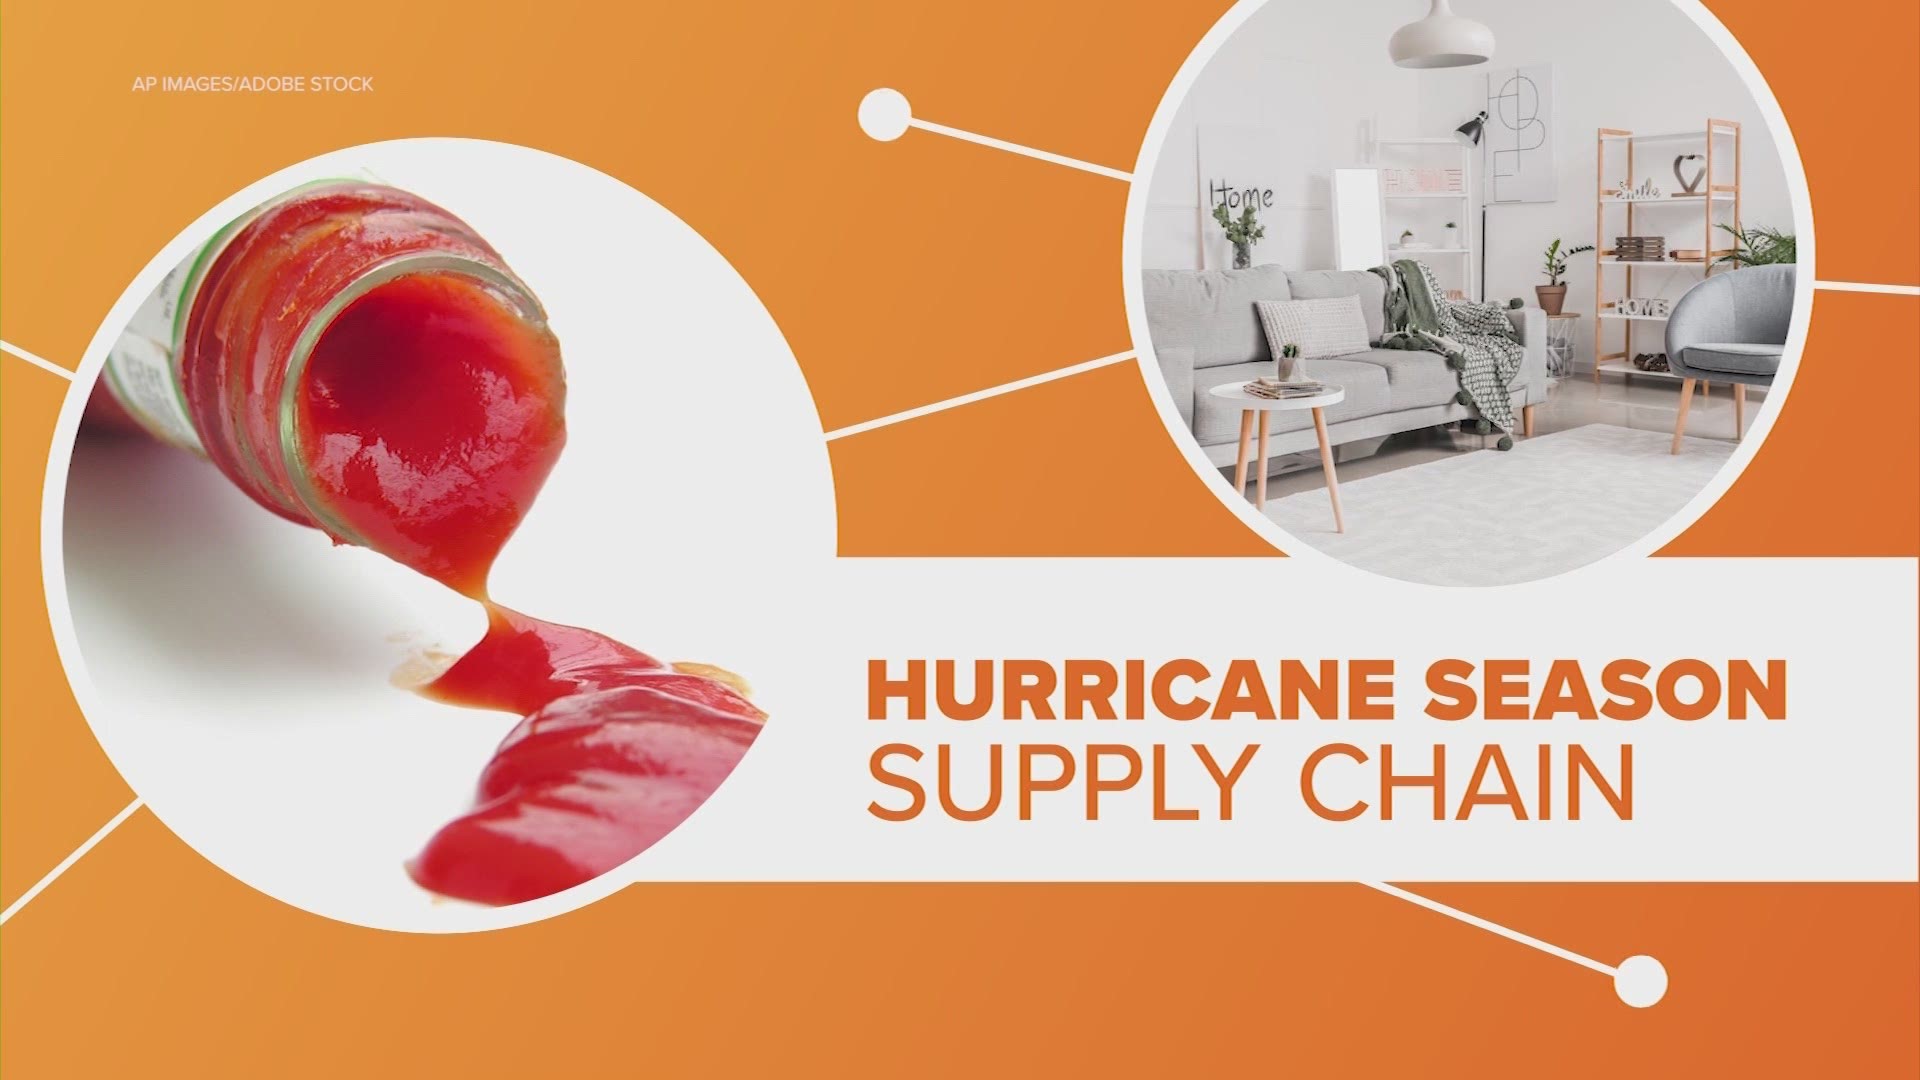 The supply chain is already strained, but a hurricane could make it worse.